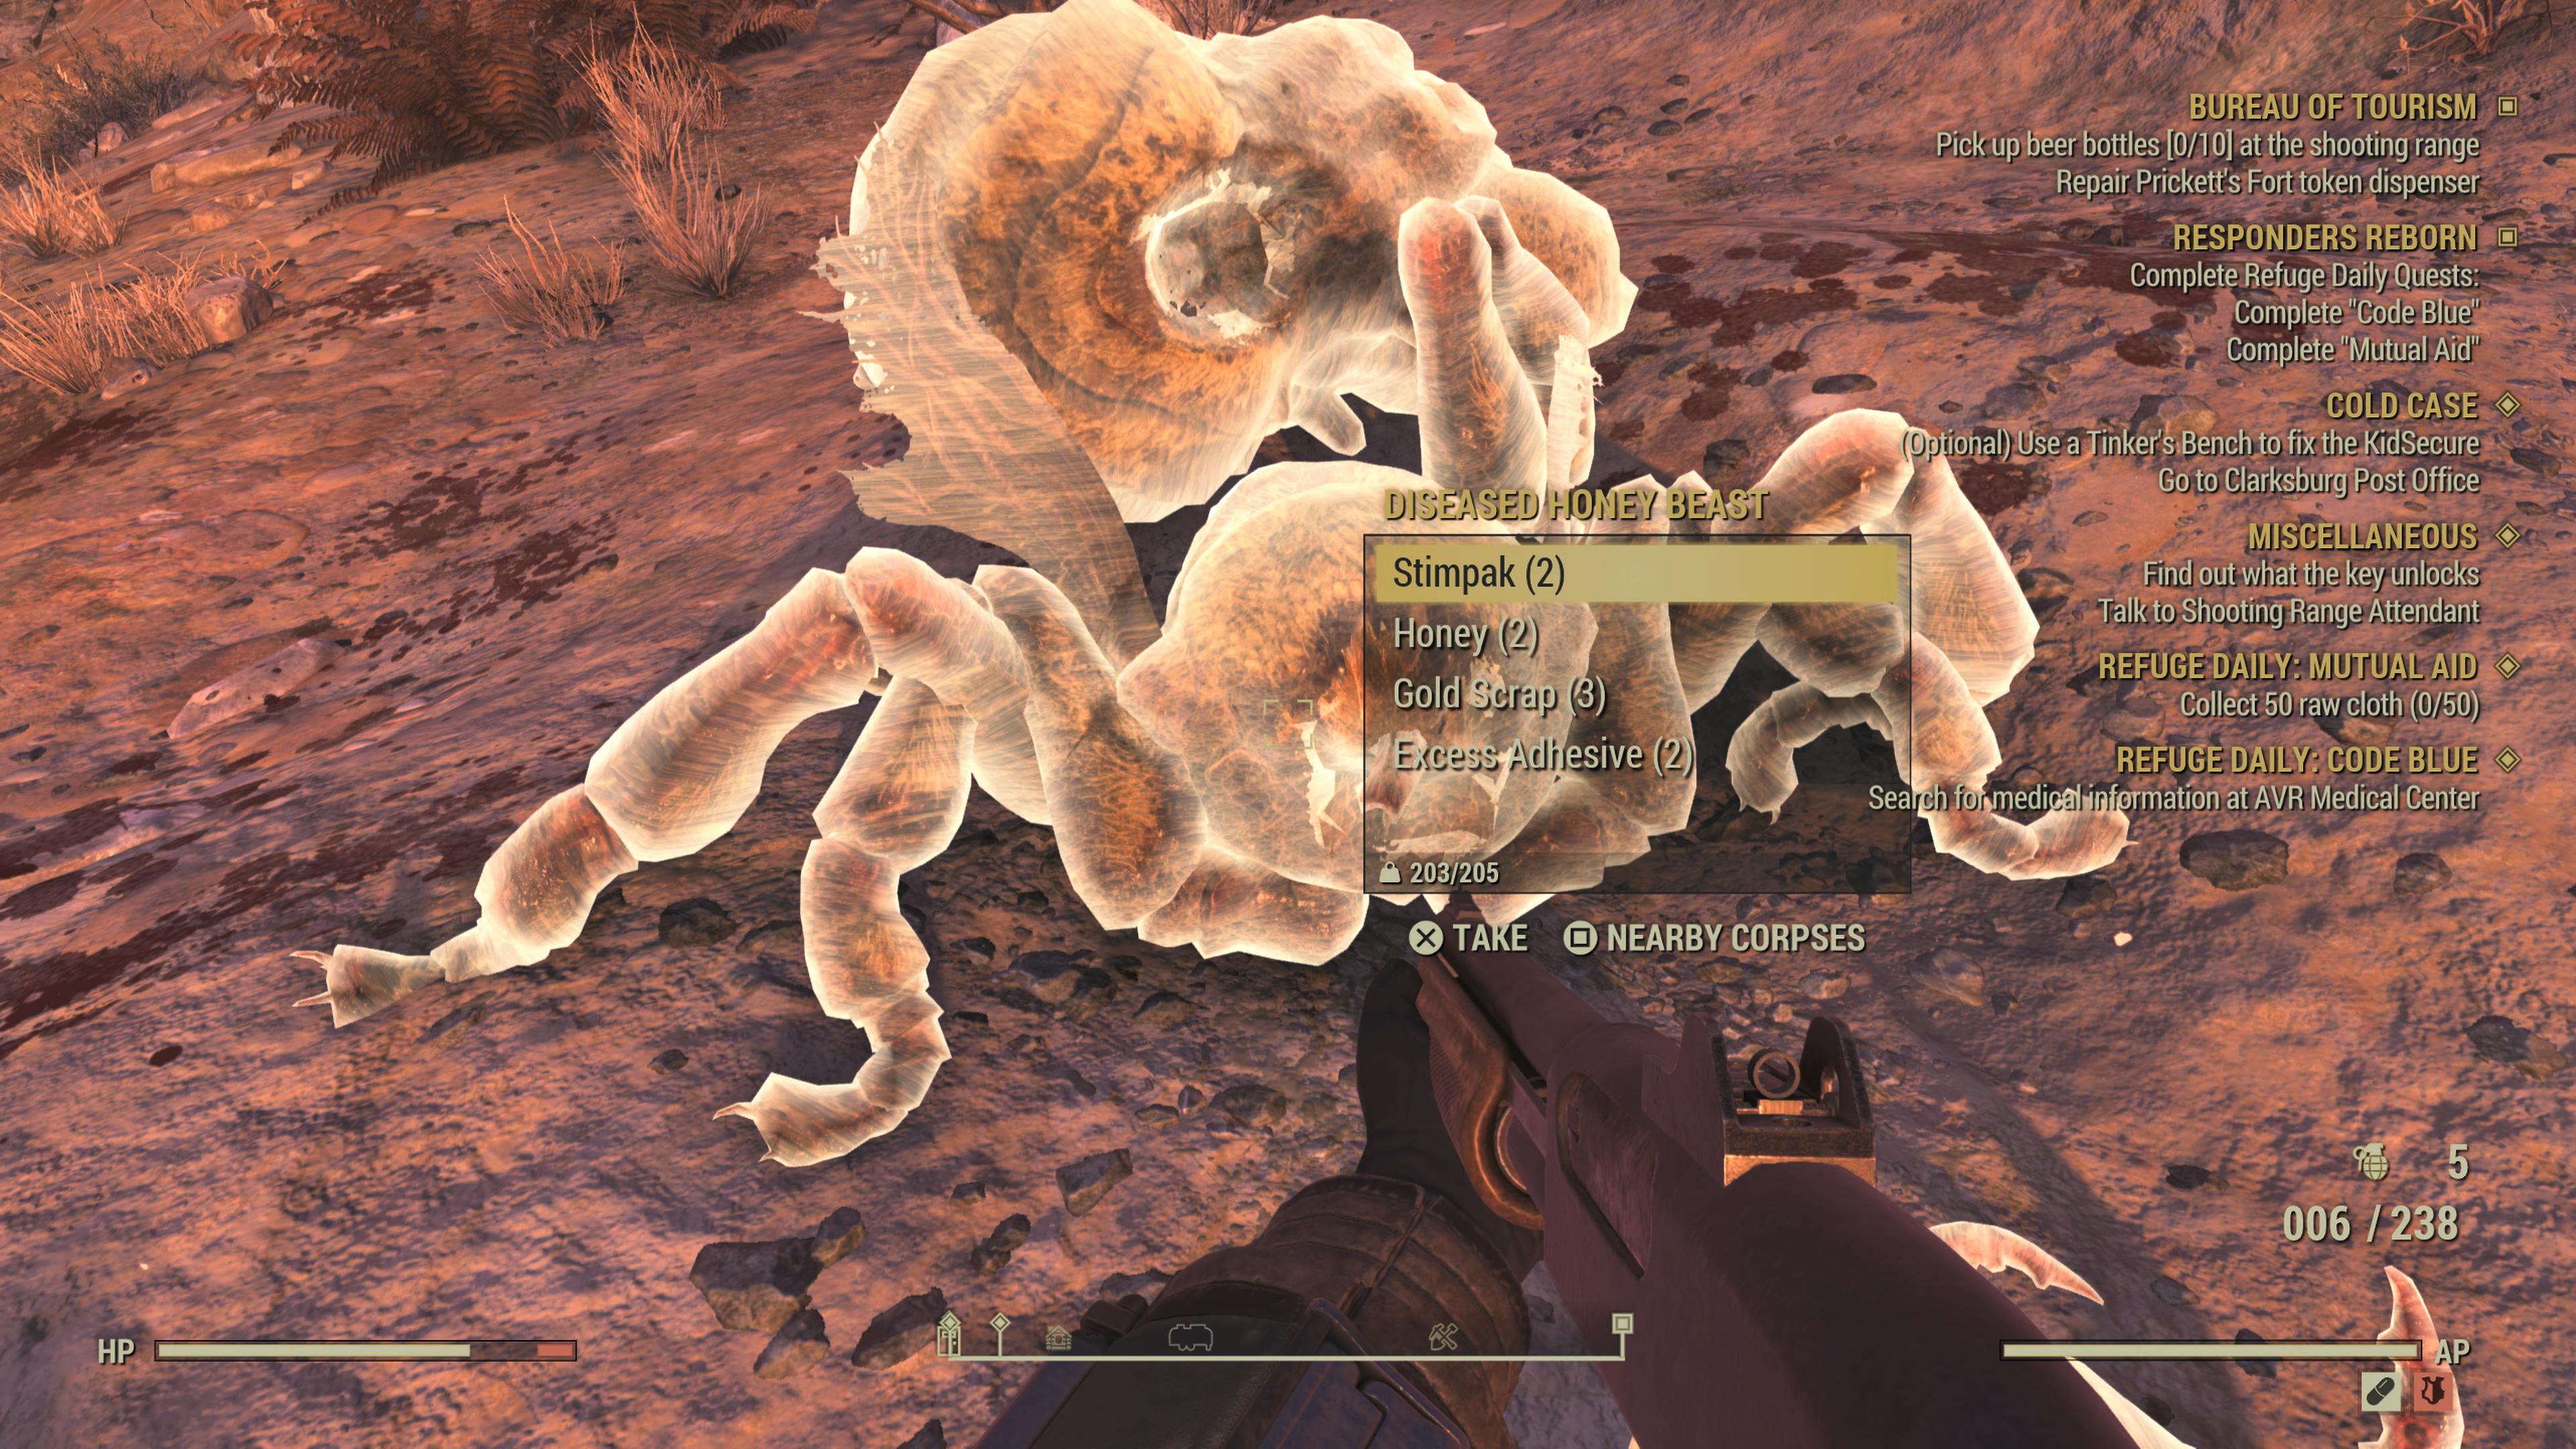 The drop inventory of a Honeybeast in Fallout 76, showing a stimpack, honey, gold scrap and excess adhesive